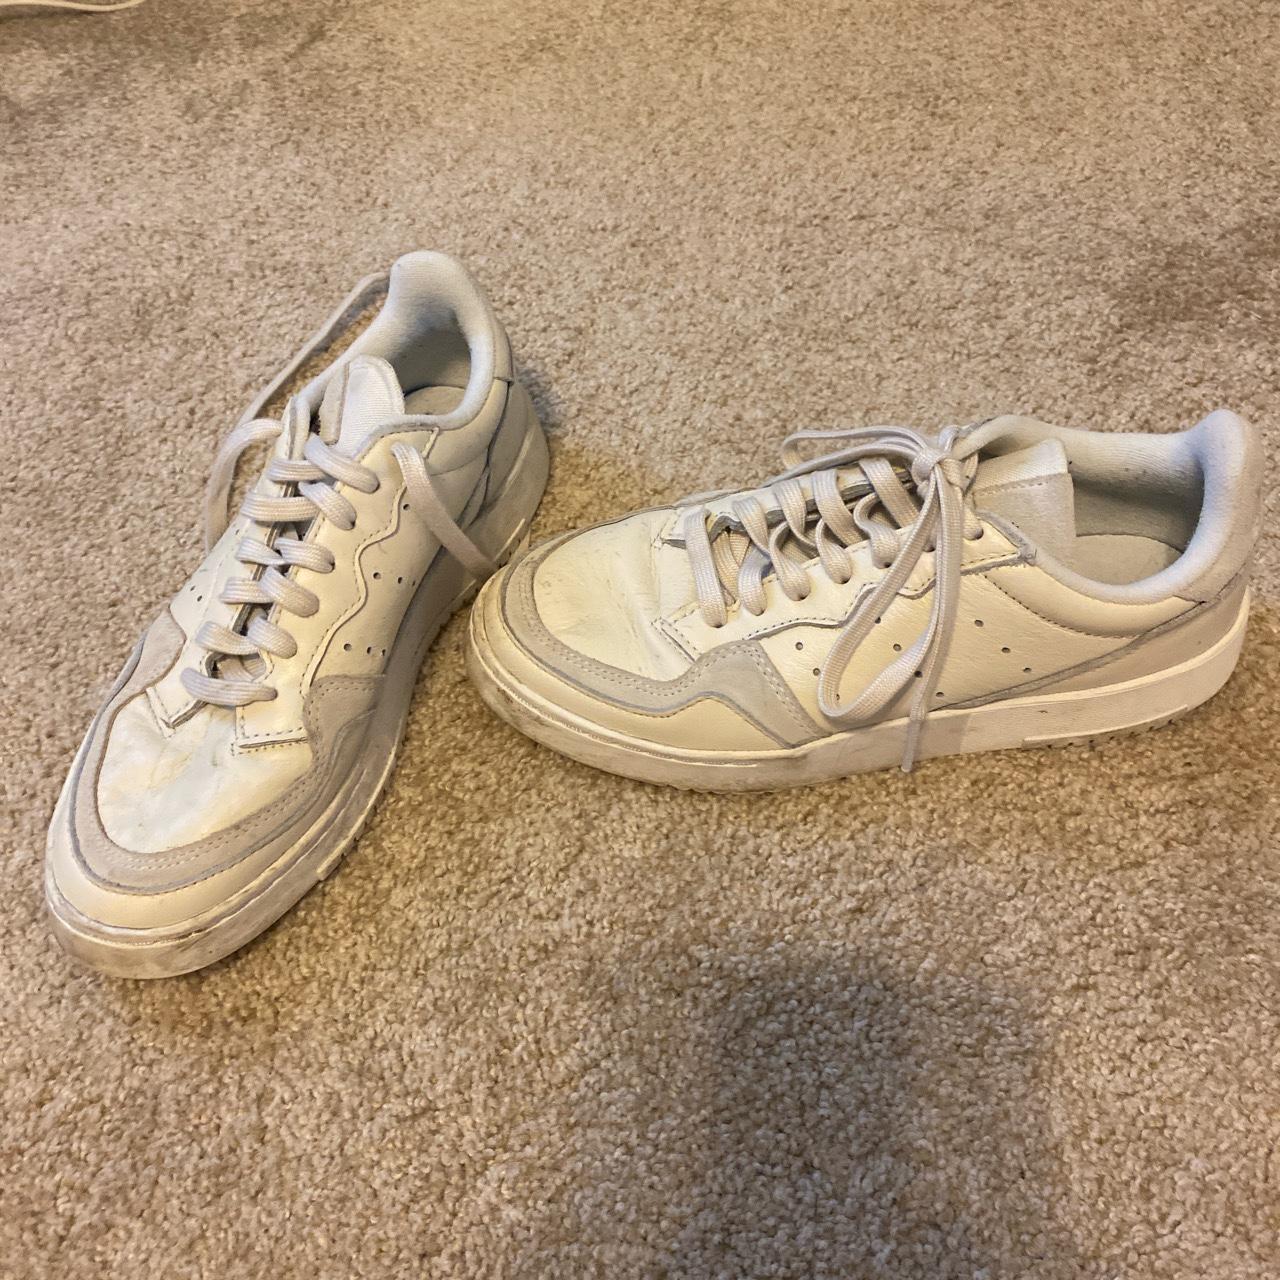 Adidas originals low, can be easily cleaned - Depop